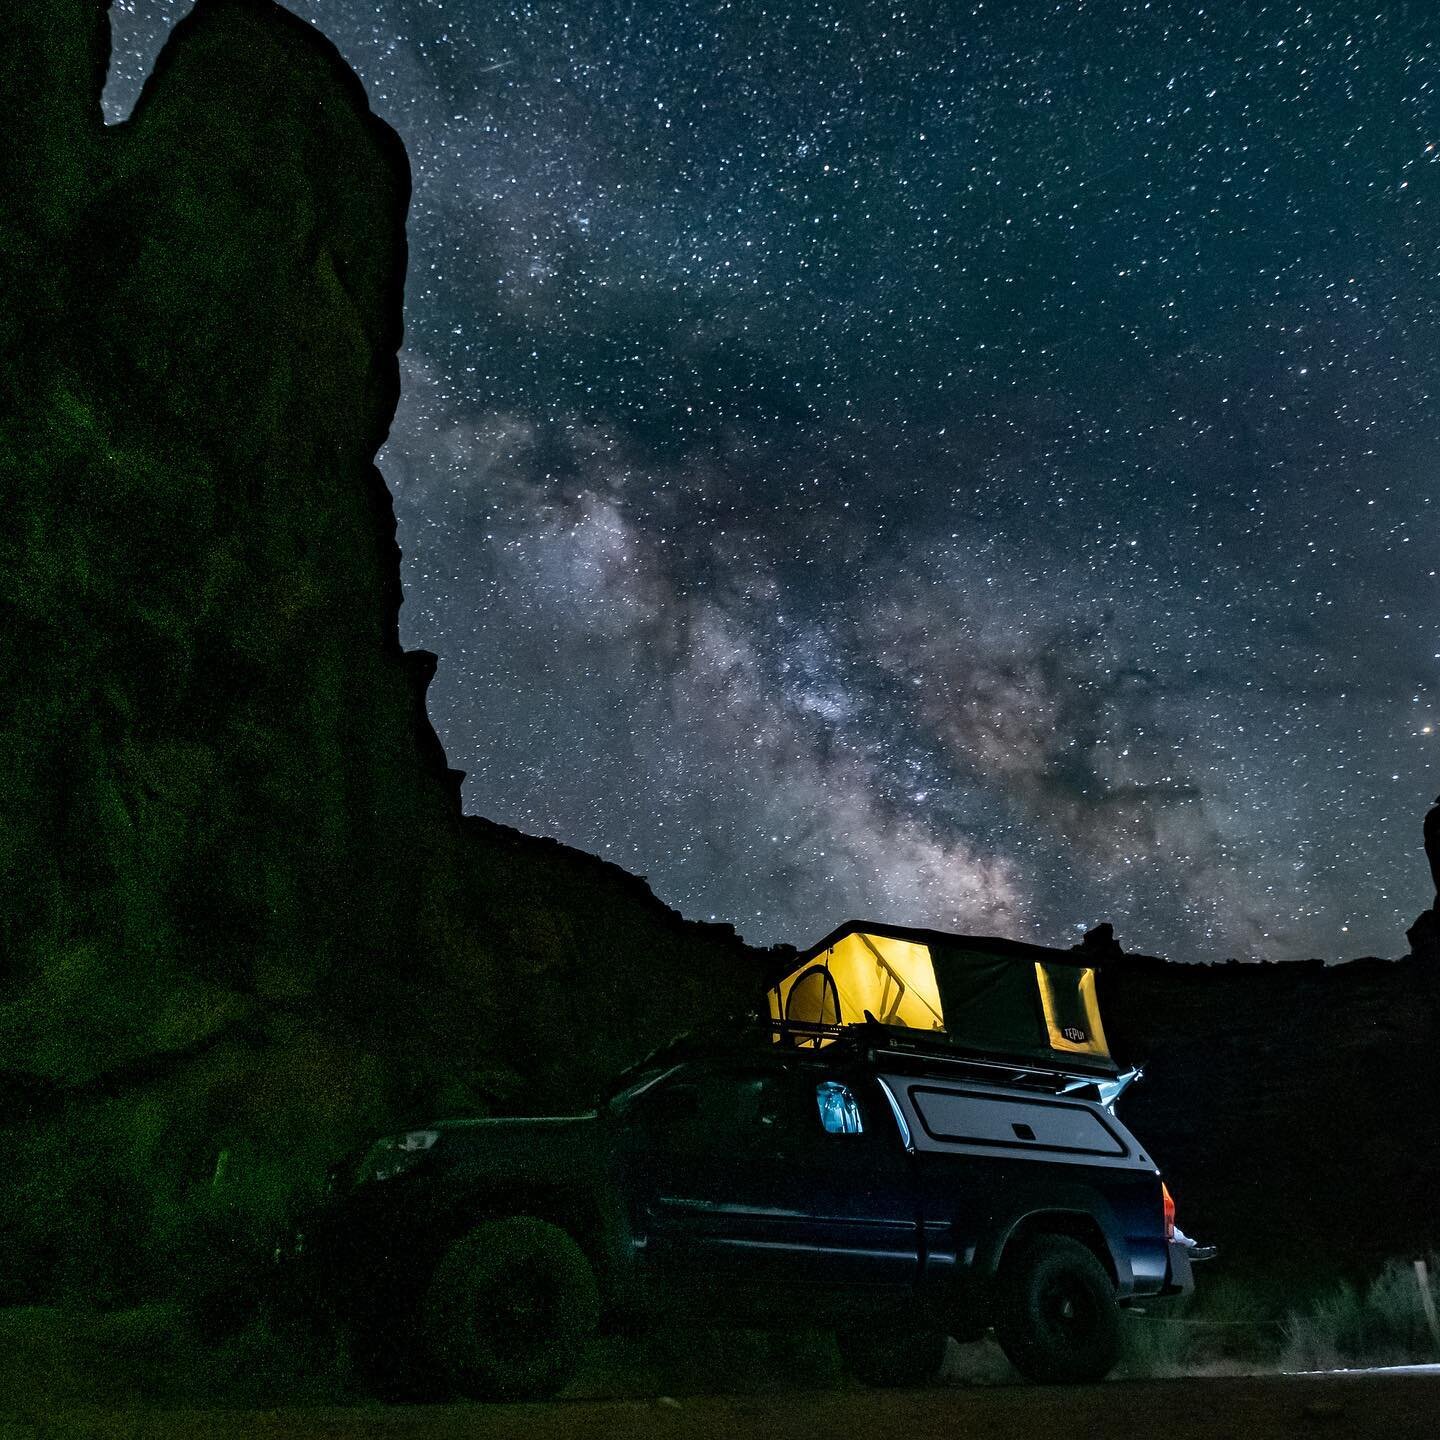 Where are you camping this weekend!? ✨⛺️ We do simple conversions for trucks and off-road too! @simpleconversions @bodyarmor4x4 @tepuitents #utah #moab #offroad #roadtrip #mountains #stars #milkyway #shootingstar #camping #glamping #lifestyle #advent